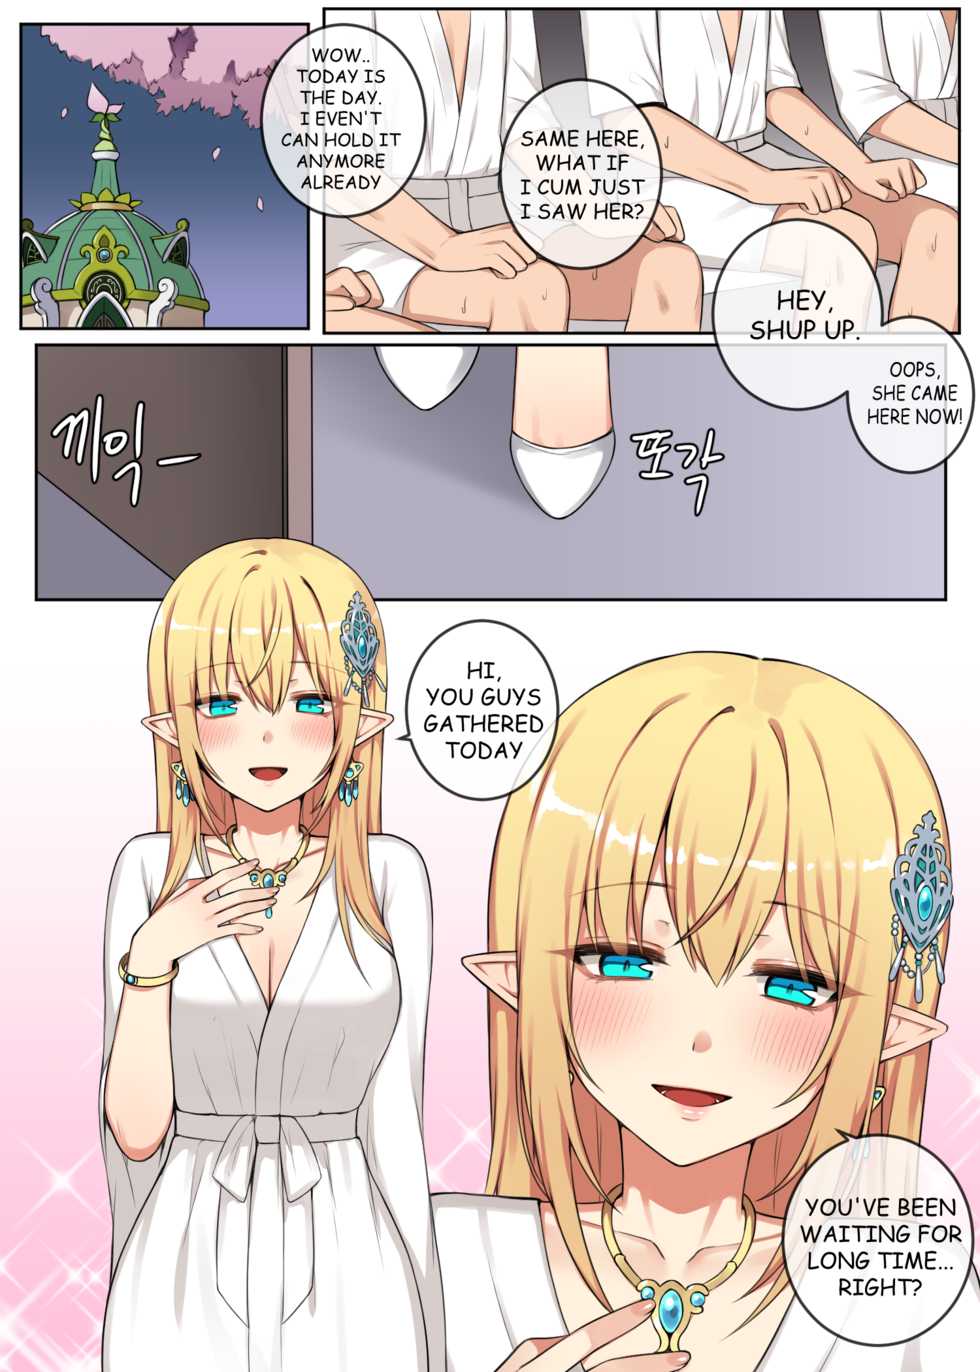 [CANAPE] 여왕의 취미 / What the queen is interested in [English] [Decensored] - Page 2